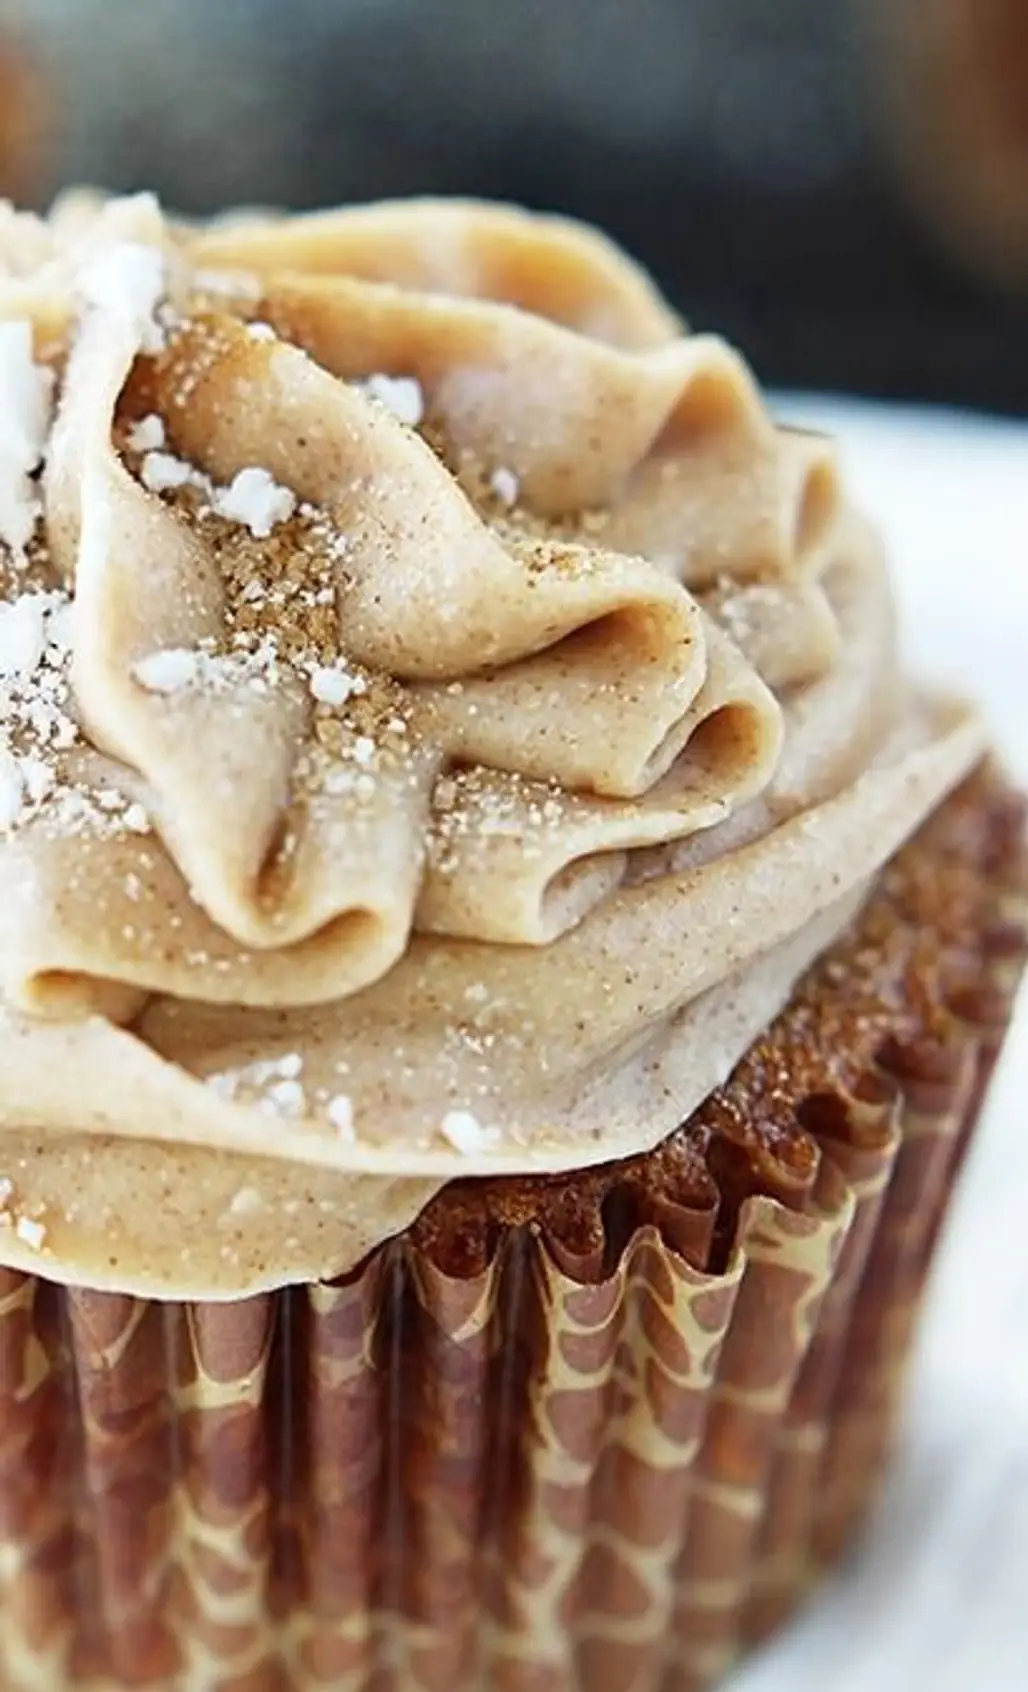 GINGERBREAD CUPCAKES with CINNAMON CREAM CHEESE FROSTING